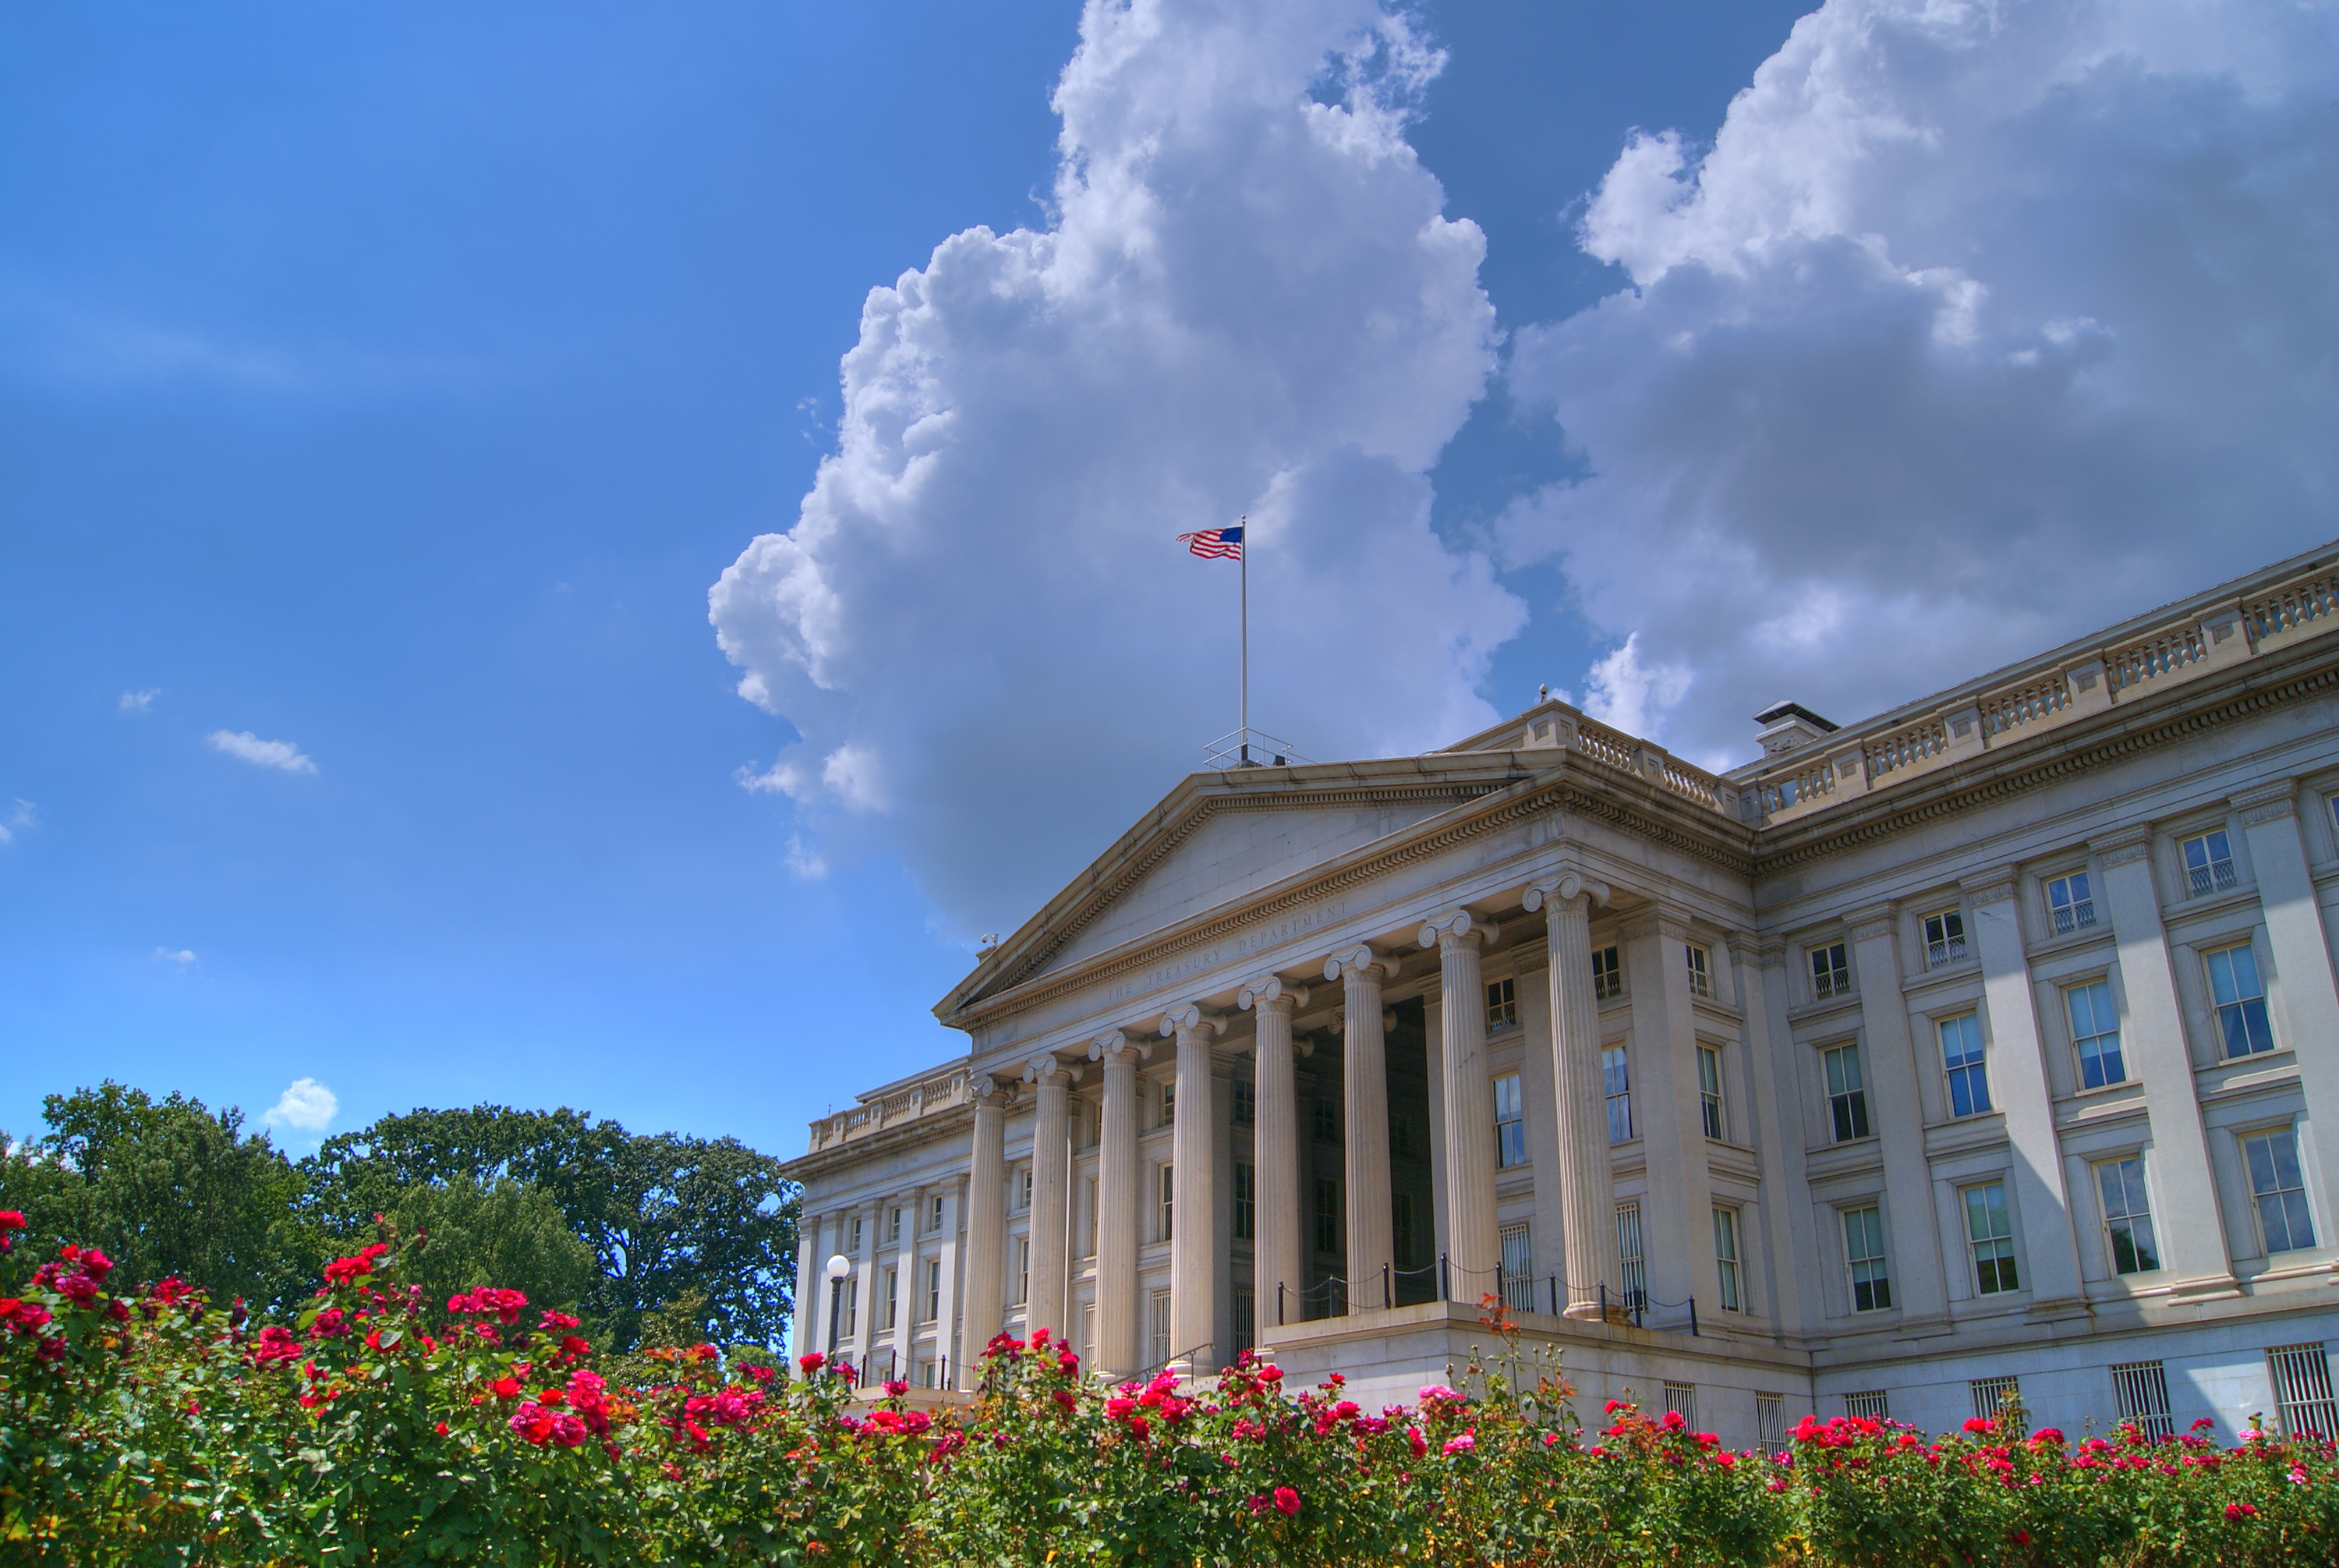 Picture of the US Treasury building with red flowers lining the bottom of the image.